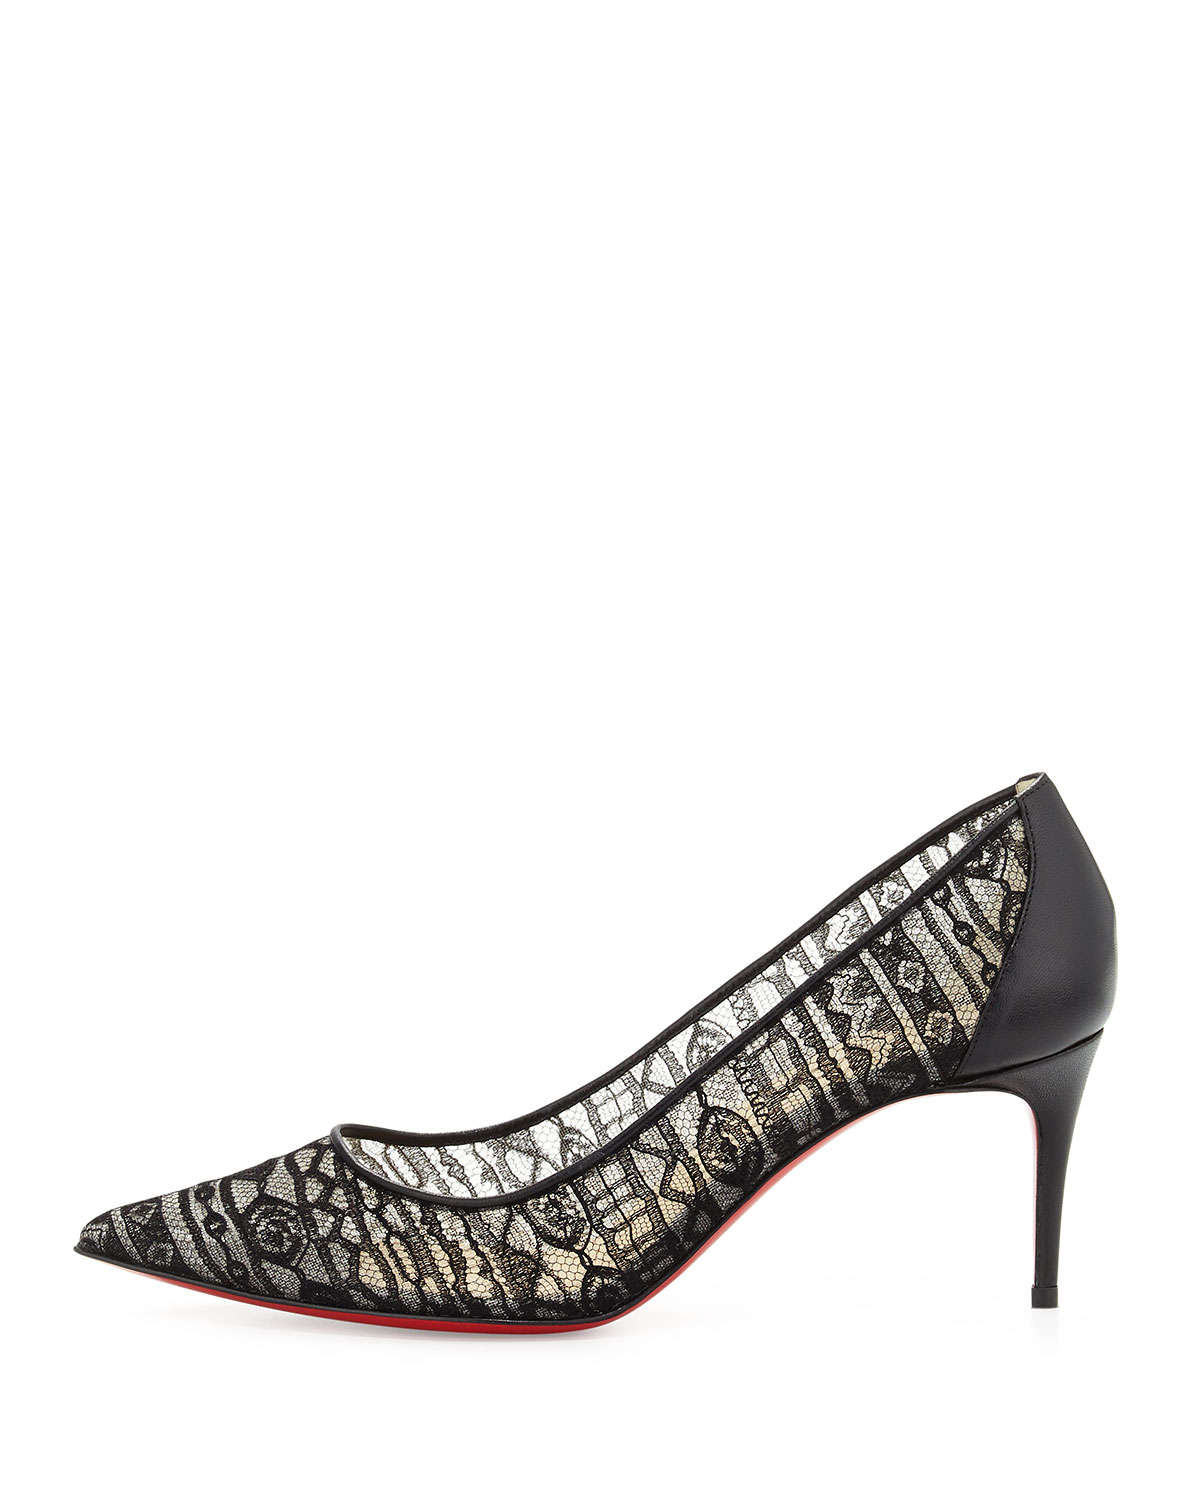 Christian louboutin Saramor Lace Red Sole Pump in Black (red) | Lyst